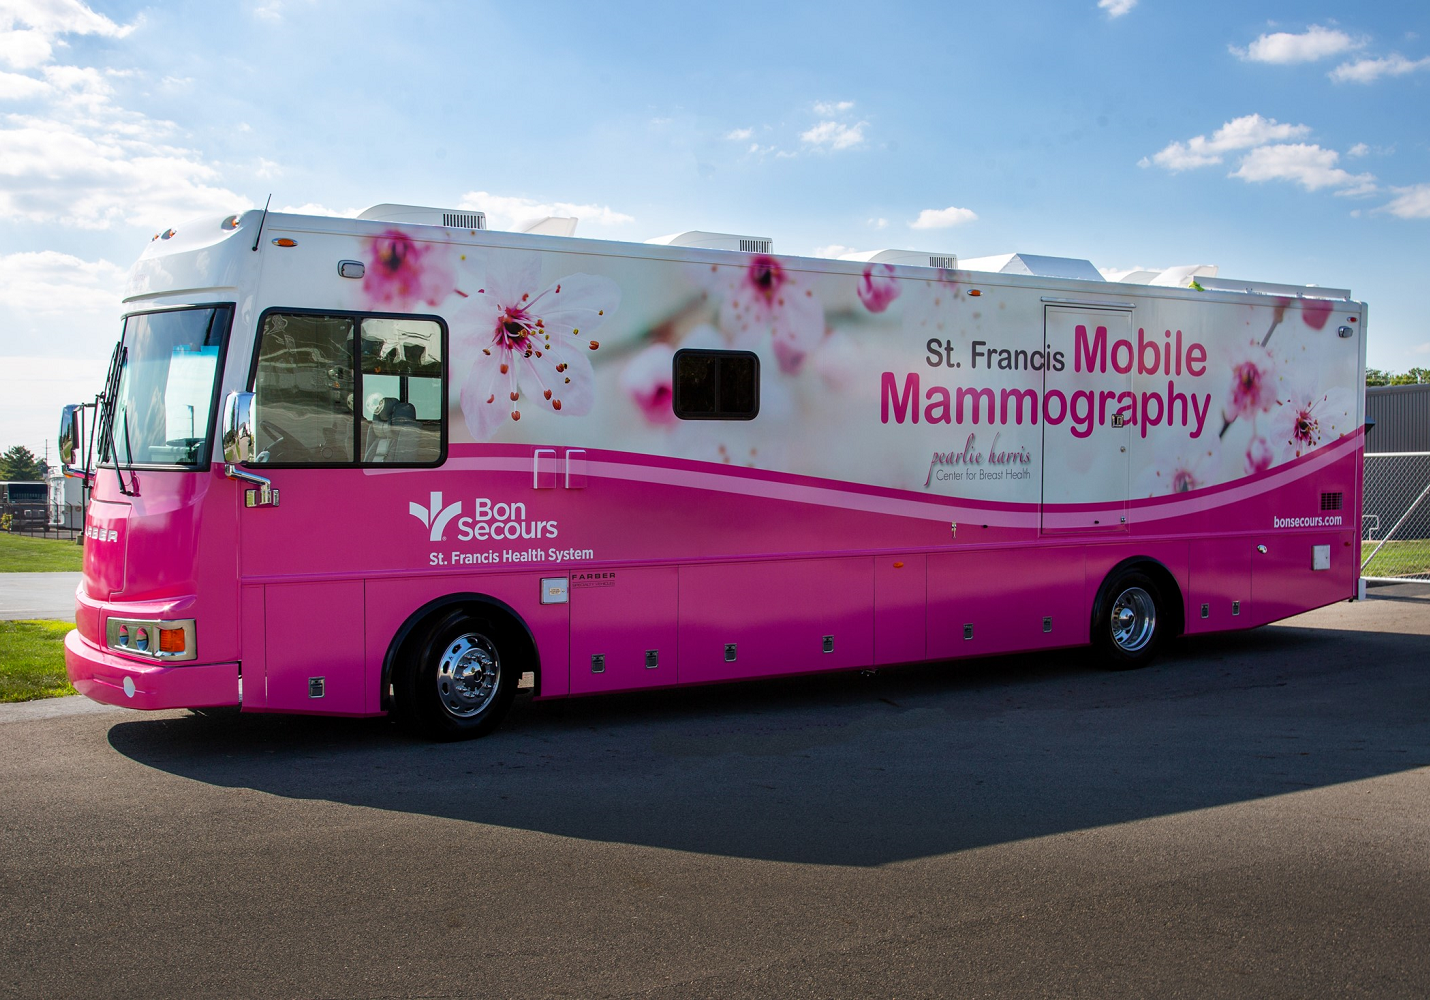 The brand new mobile mammography coach rolling out across Greenville, SC.